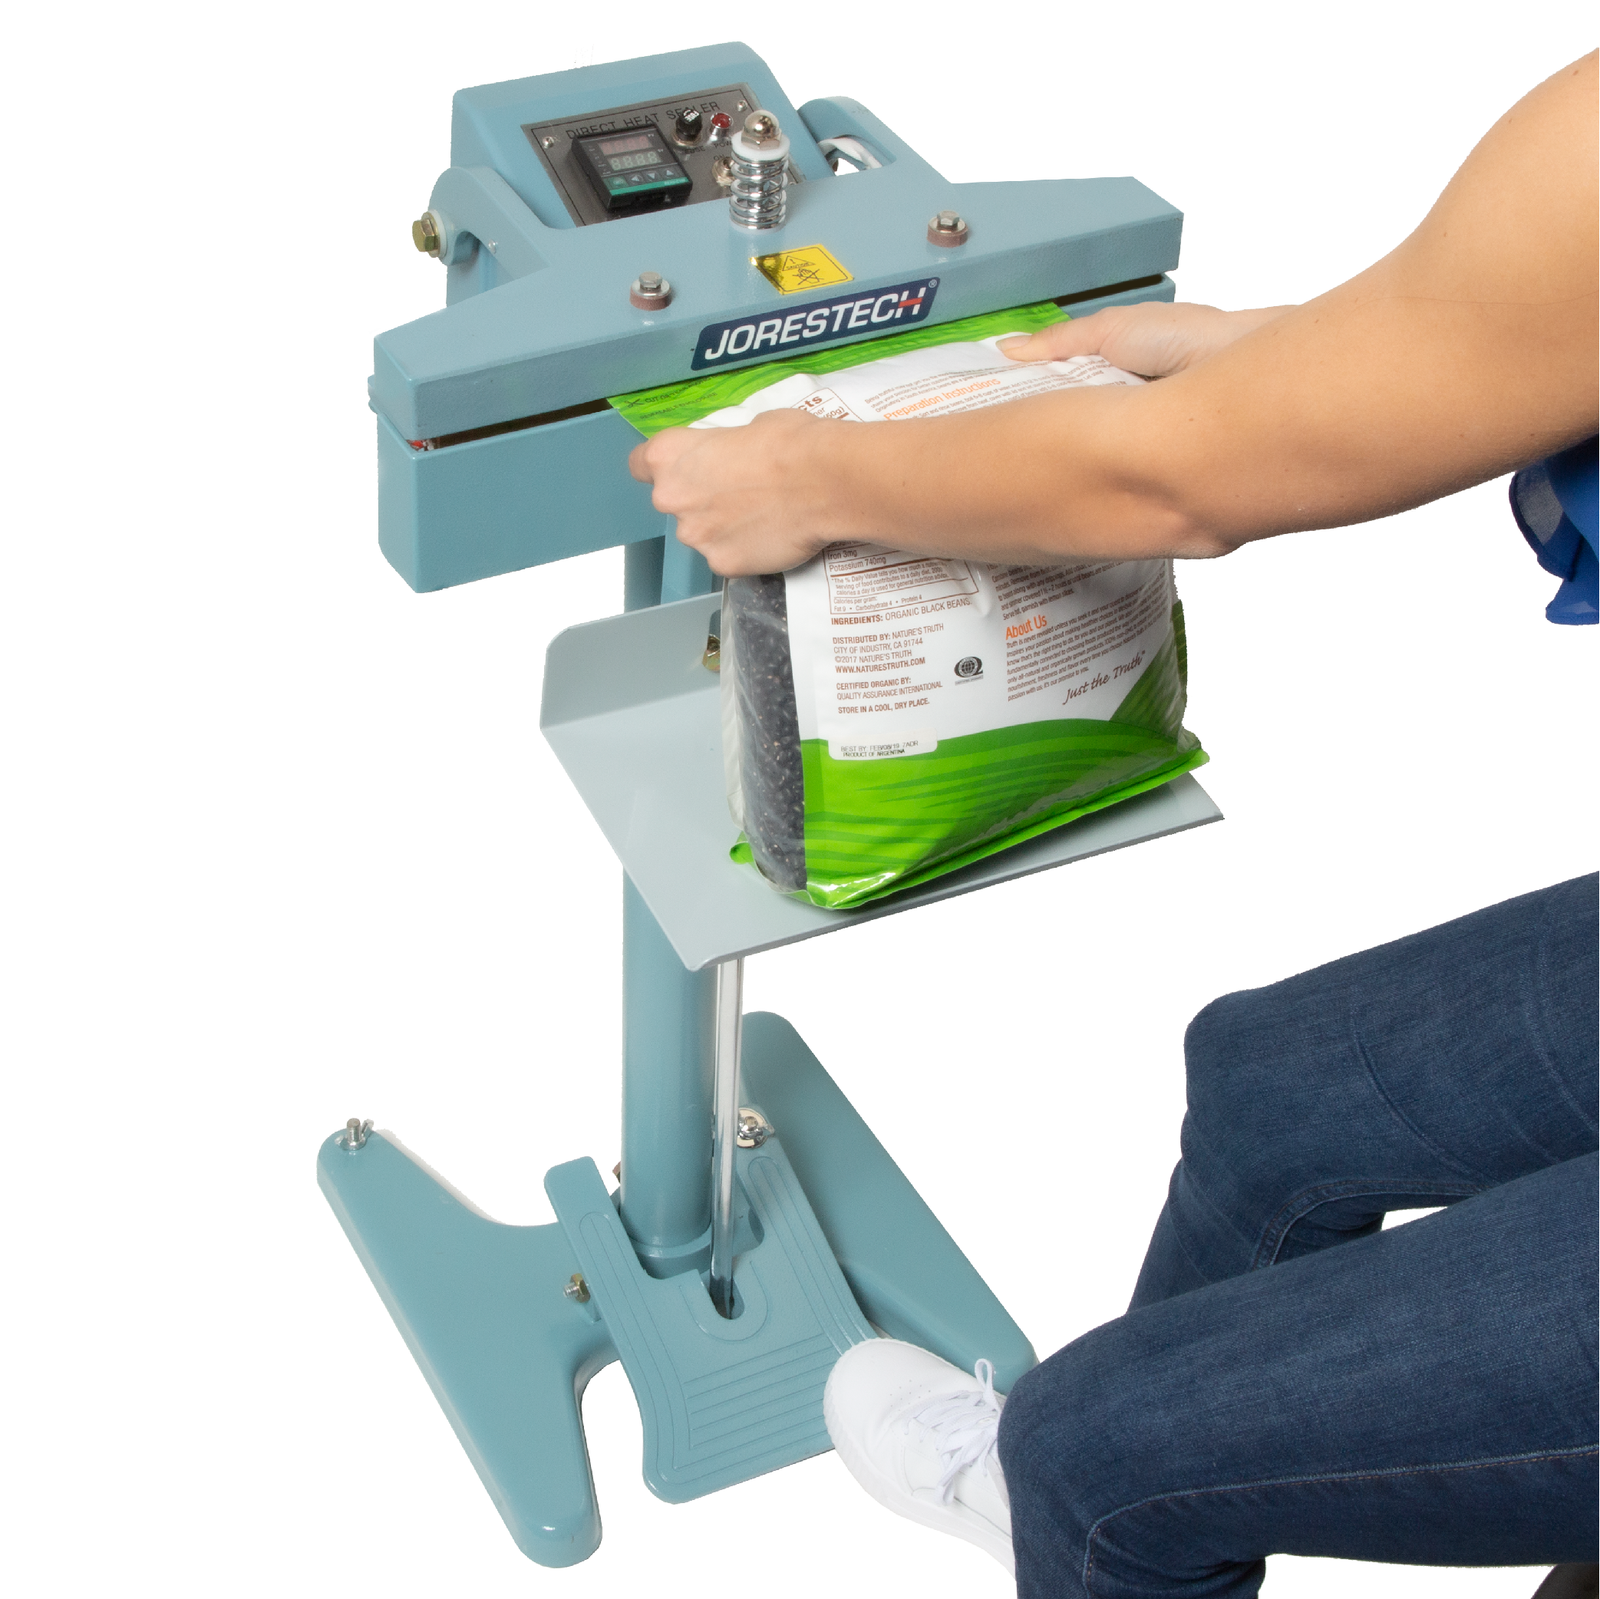 Worker stepping on the foot pedal of blue constant heat bag sealer to seal a heat sealable plastic bag